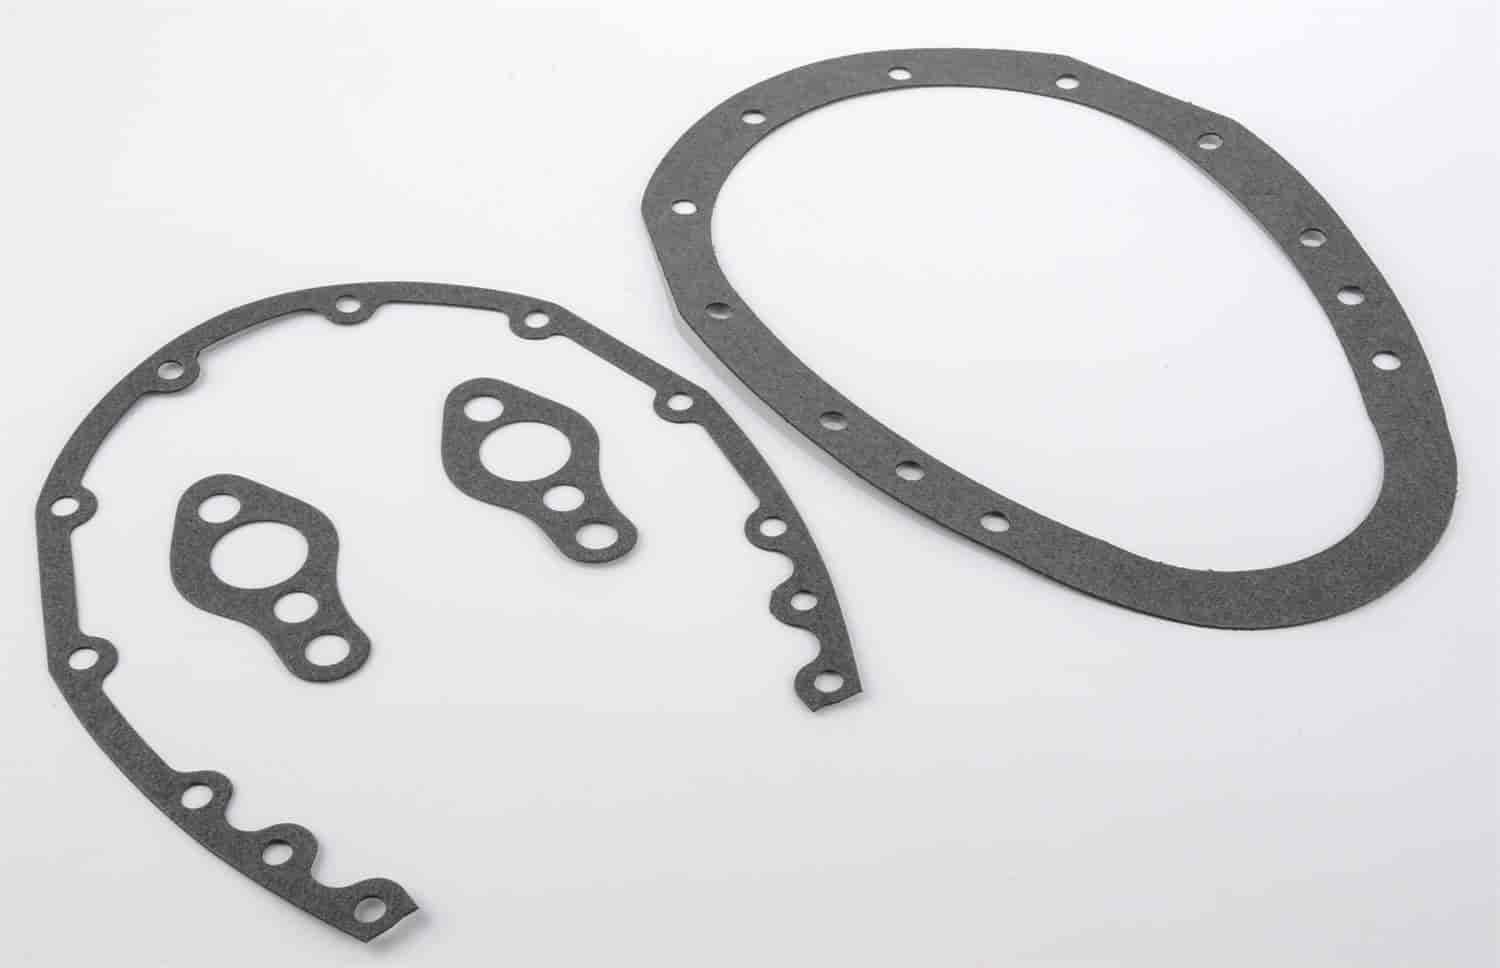 Timing Cover Gasket Set for 1955-1986 Small Block Chevy & 90° V6